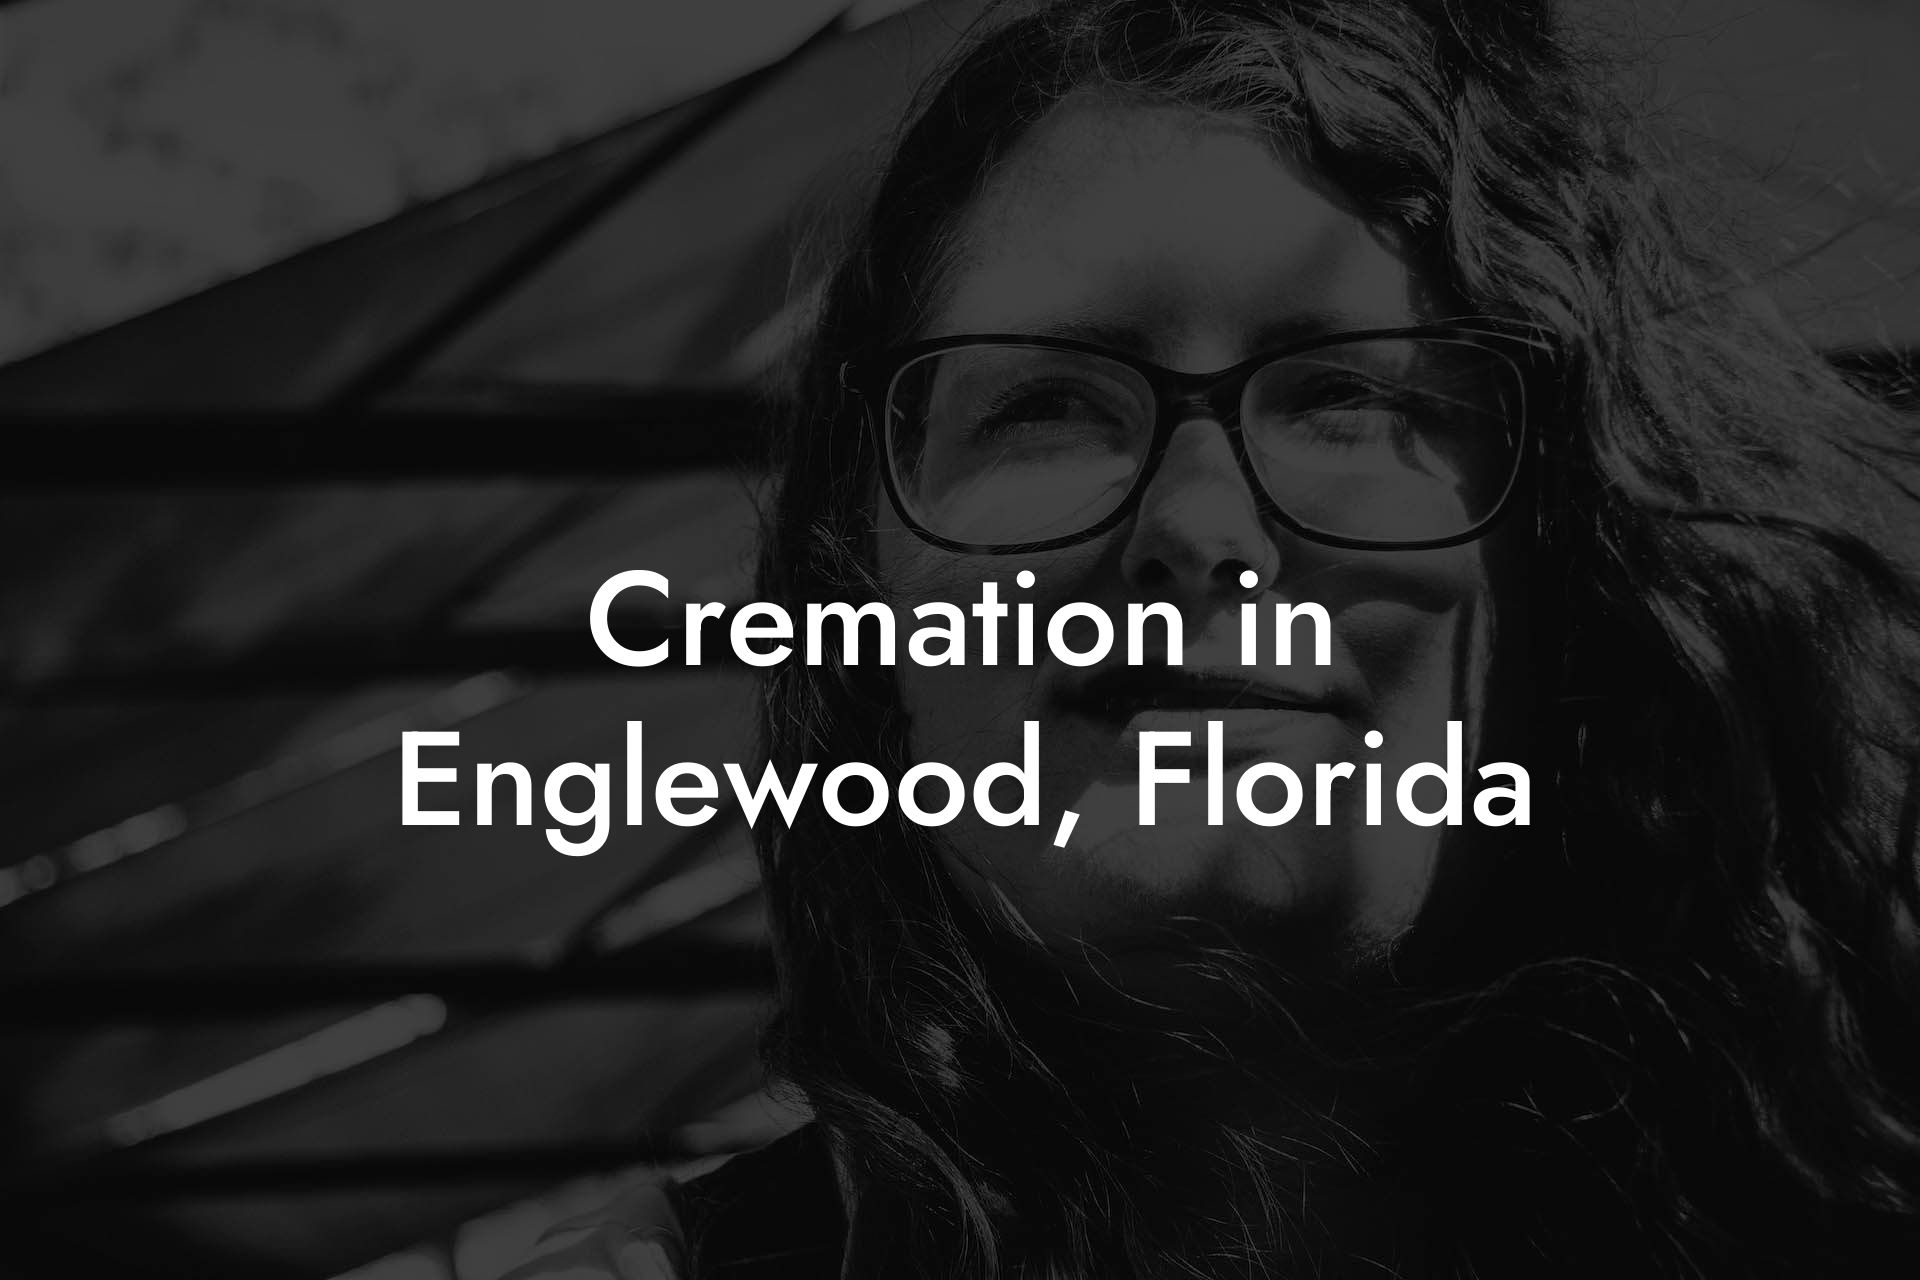 Cremation in Englewood, Florida